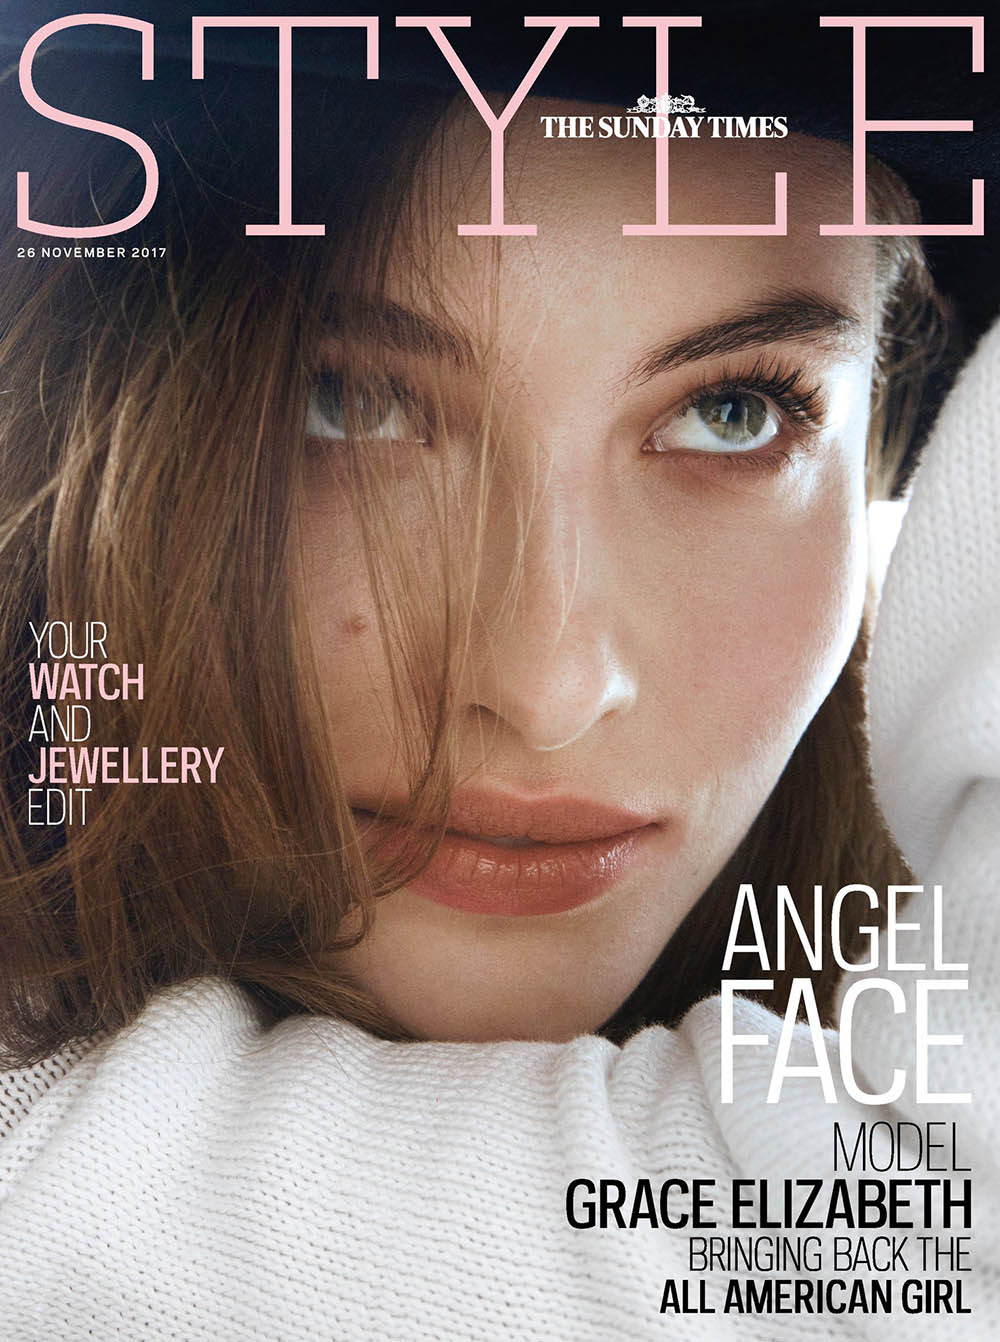 Grace Elizabeth covers The Sunday Times Style November 26, 2017 by Rory Van Millingen